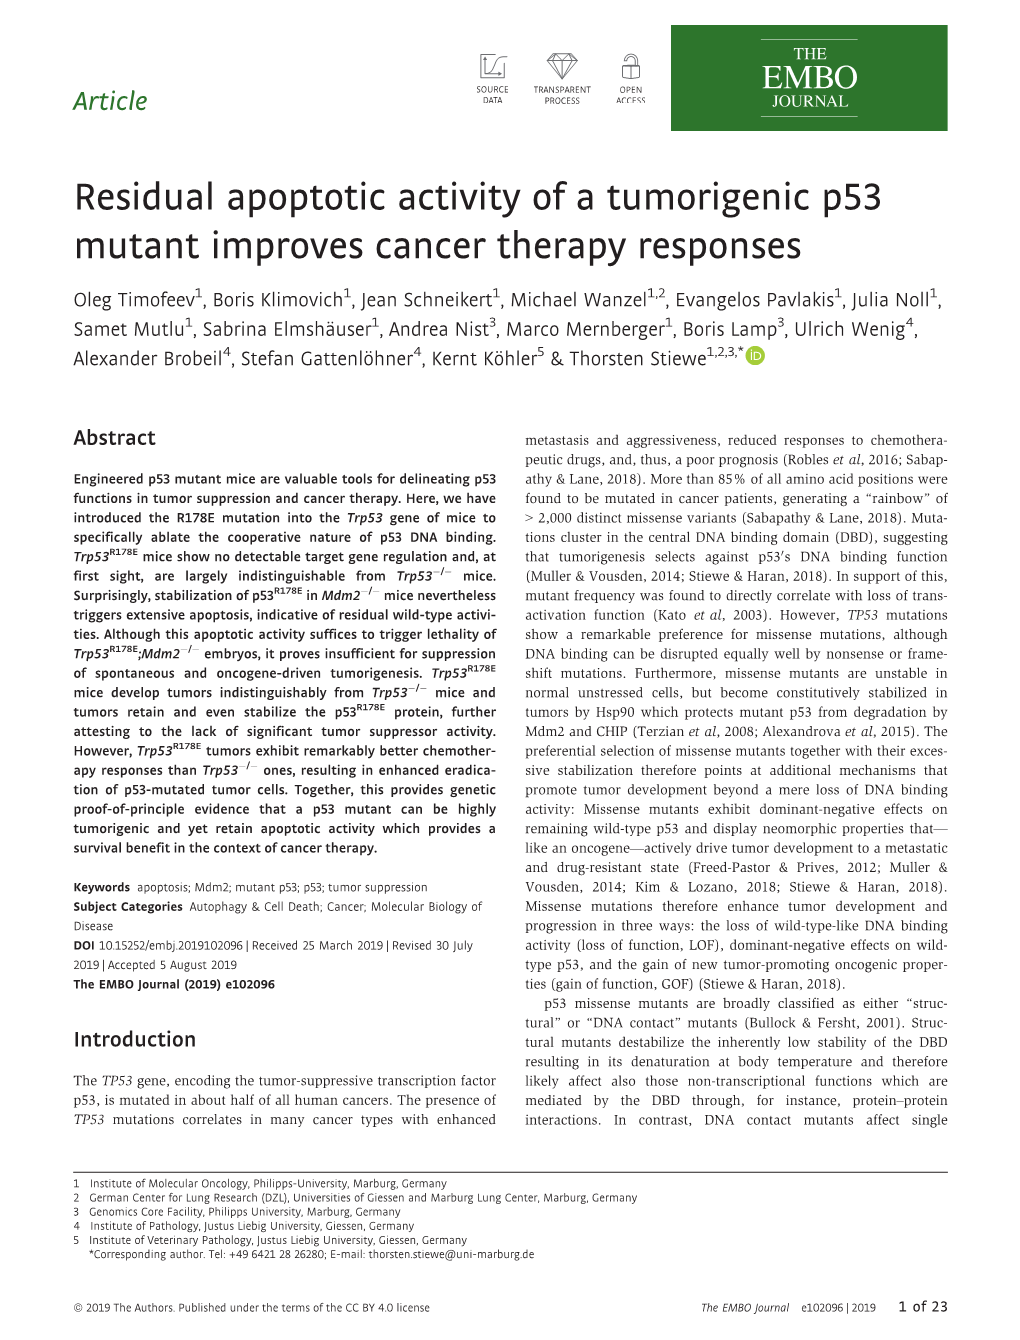 Residual Apoptotic Activity of a Tumorigenic P53 Mutant Improves Cancer Therapy Responses